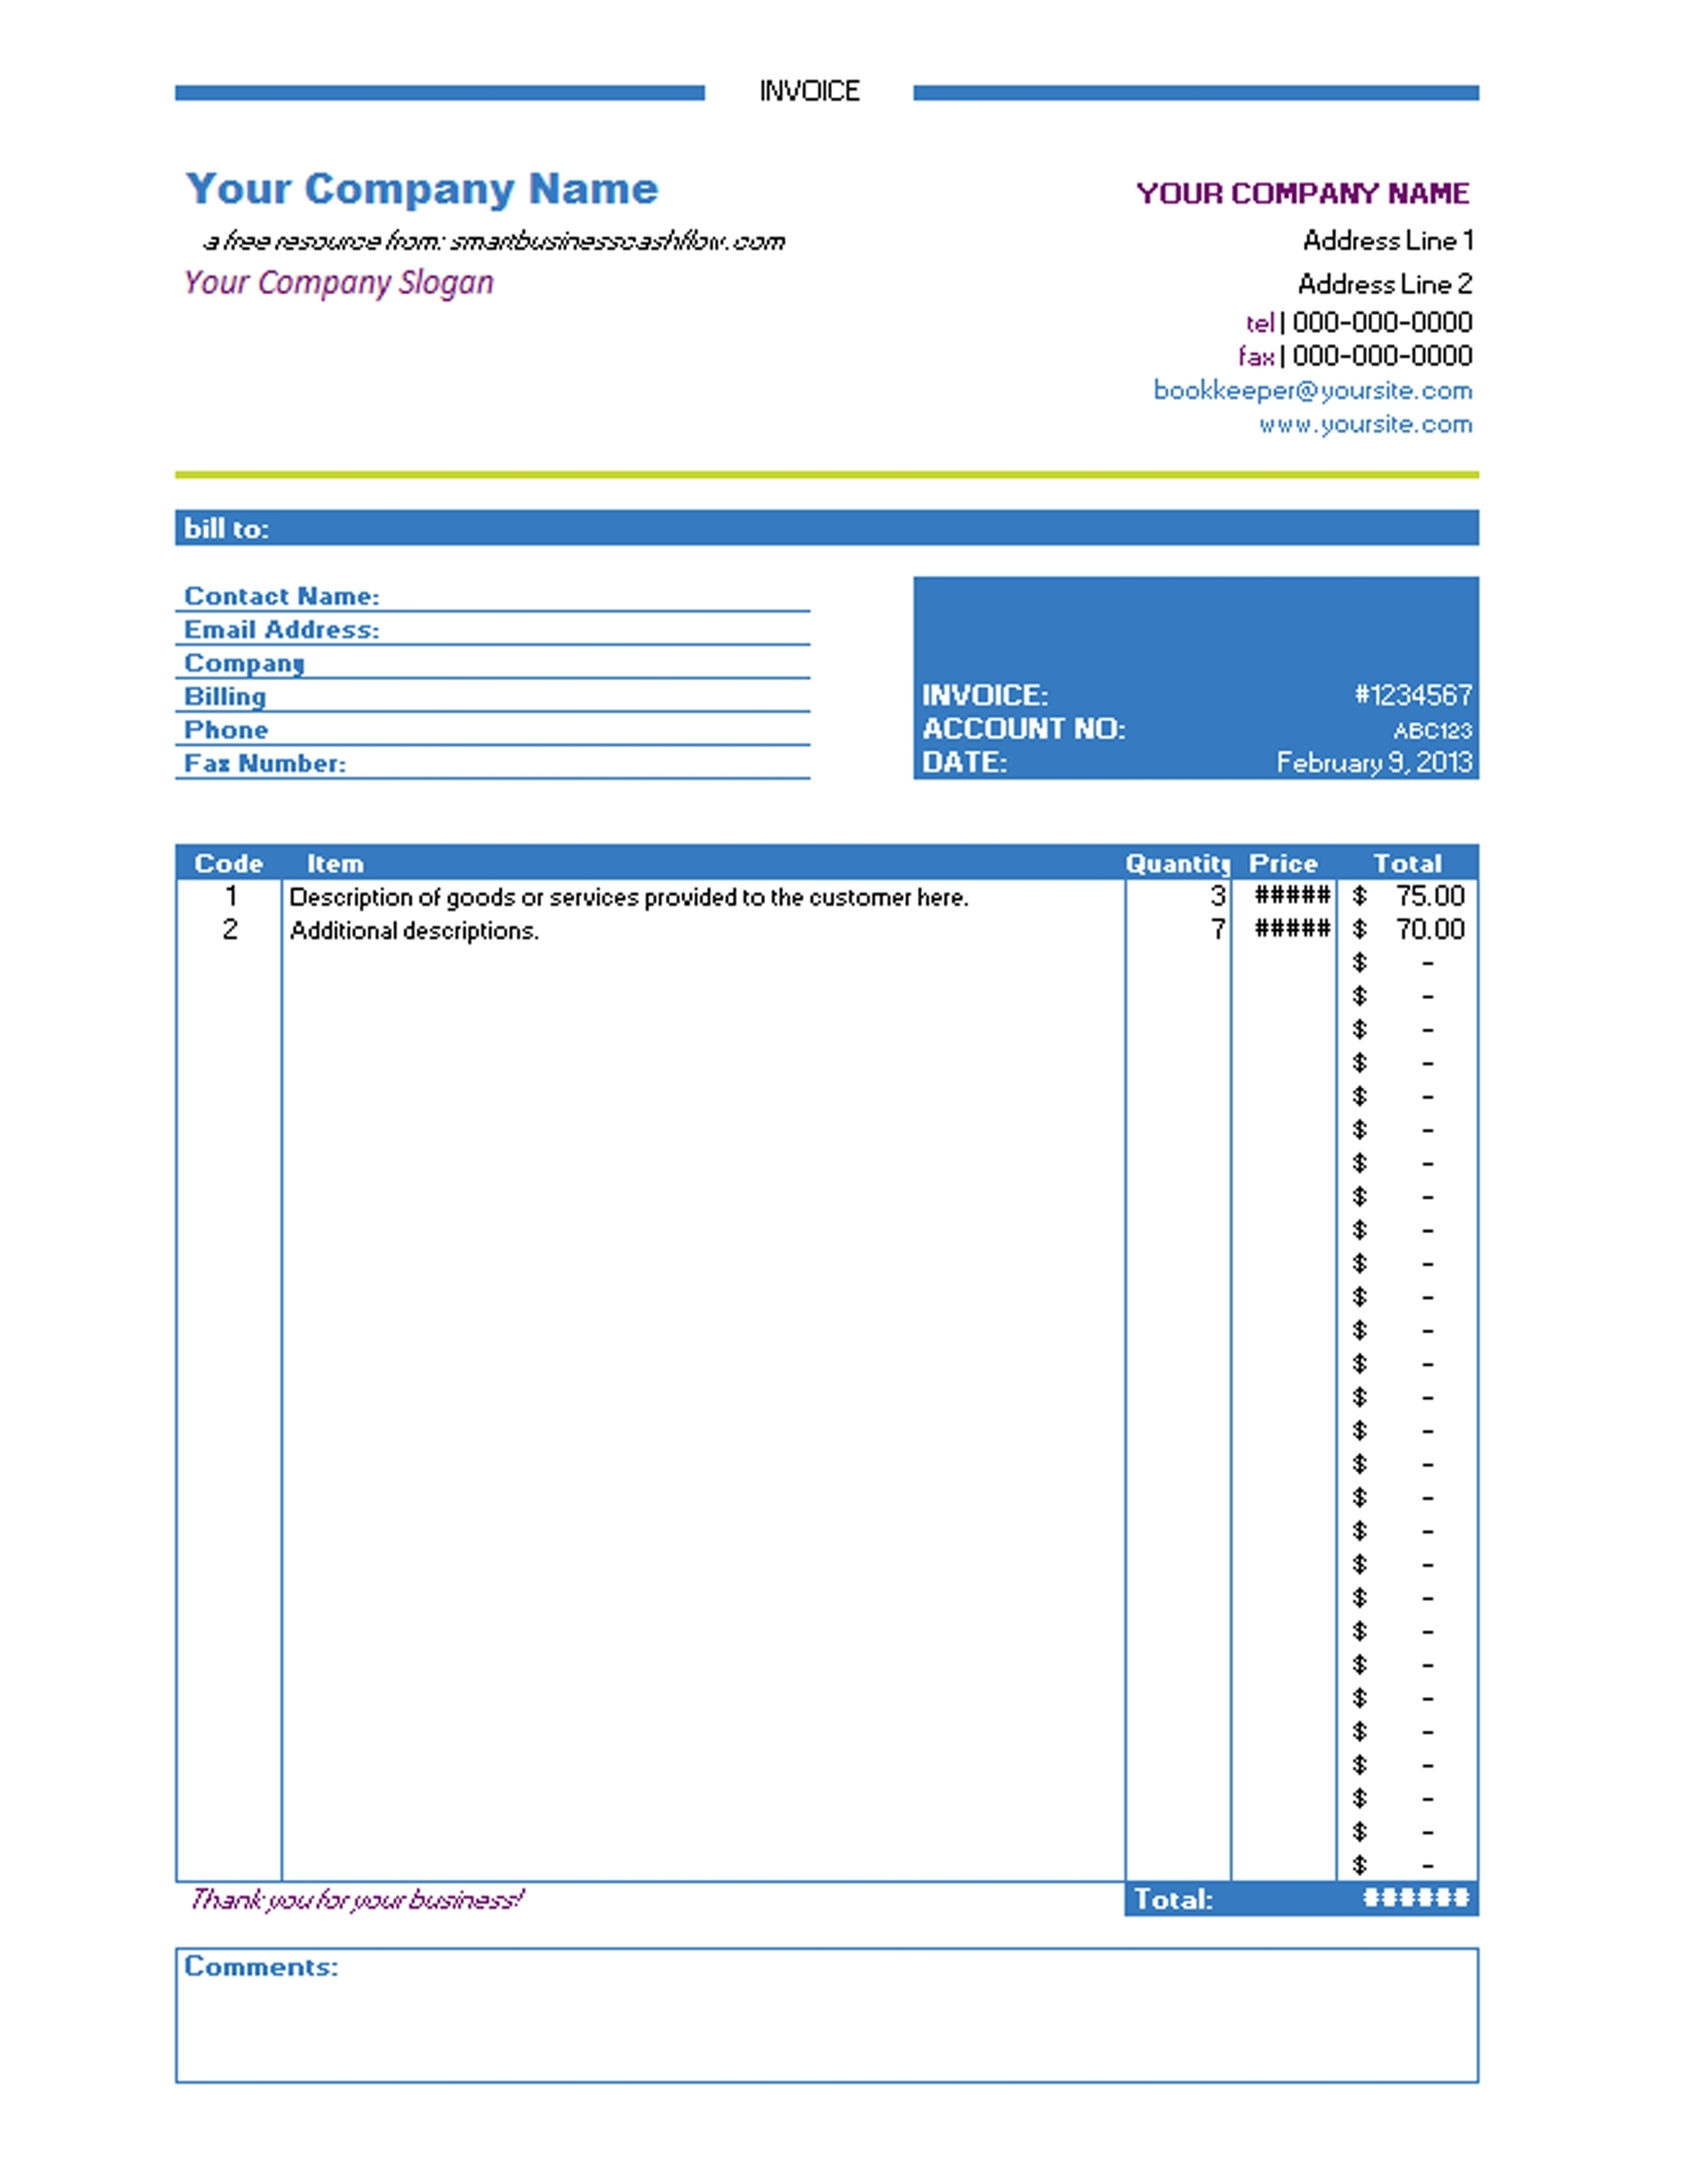 creating an invoice in excel invoice template ideas create an invoice in excel